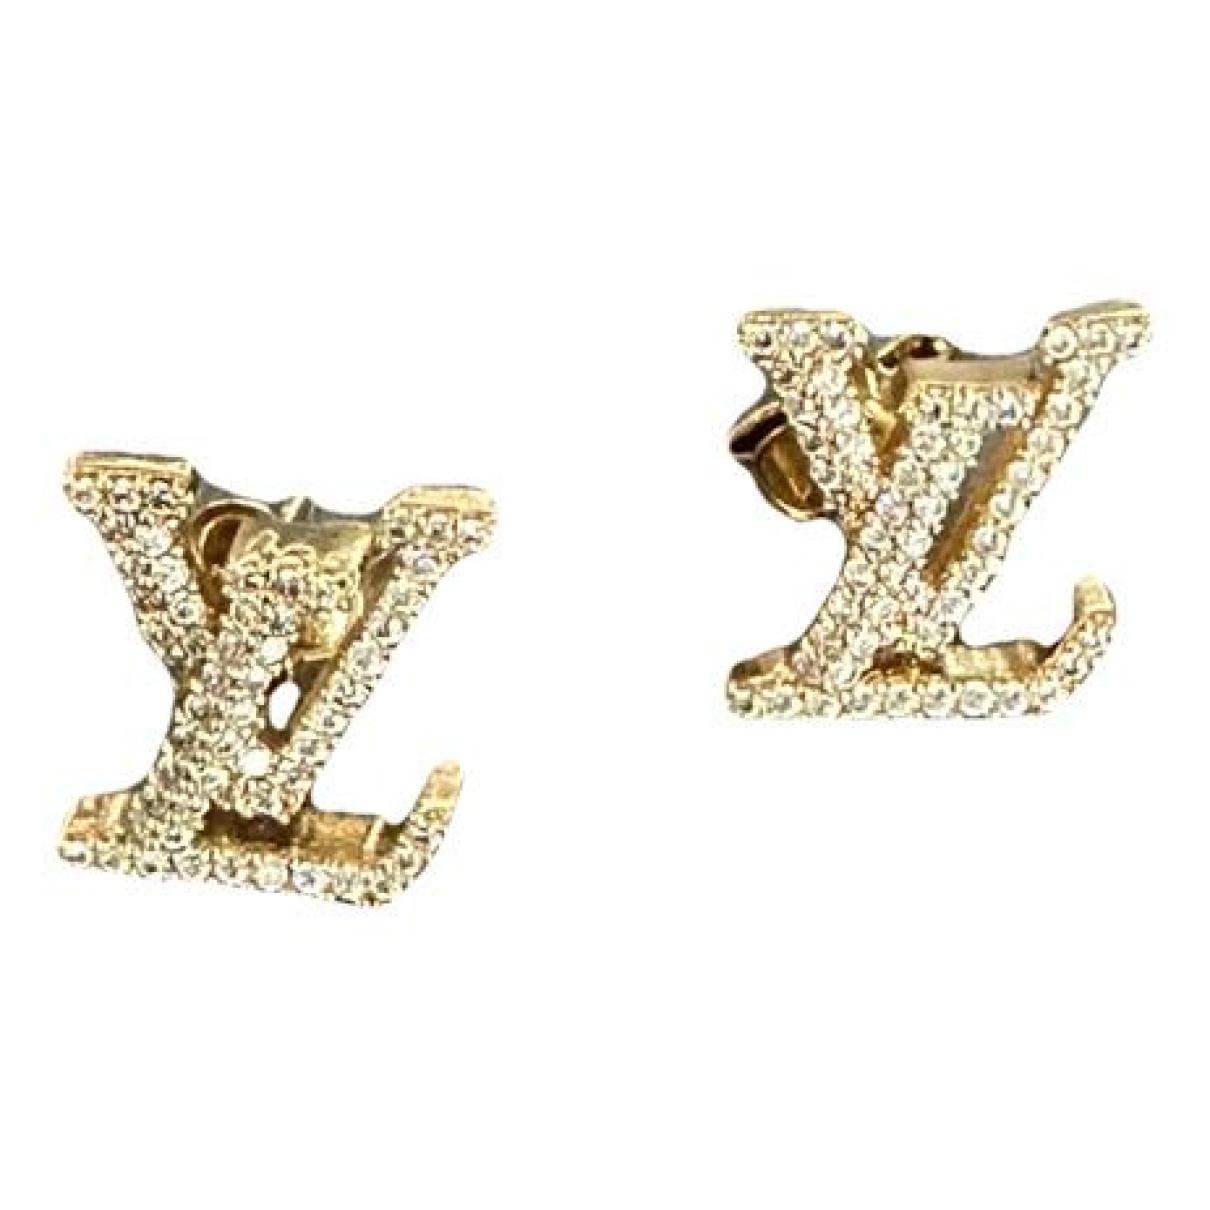 Louis Vuitton LV Iconic Stud Earrings Metal with Crystals Silver 2165161